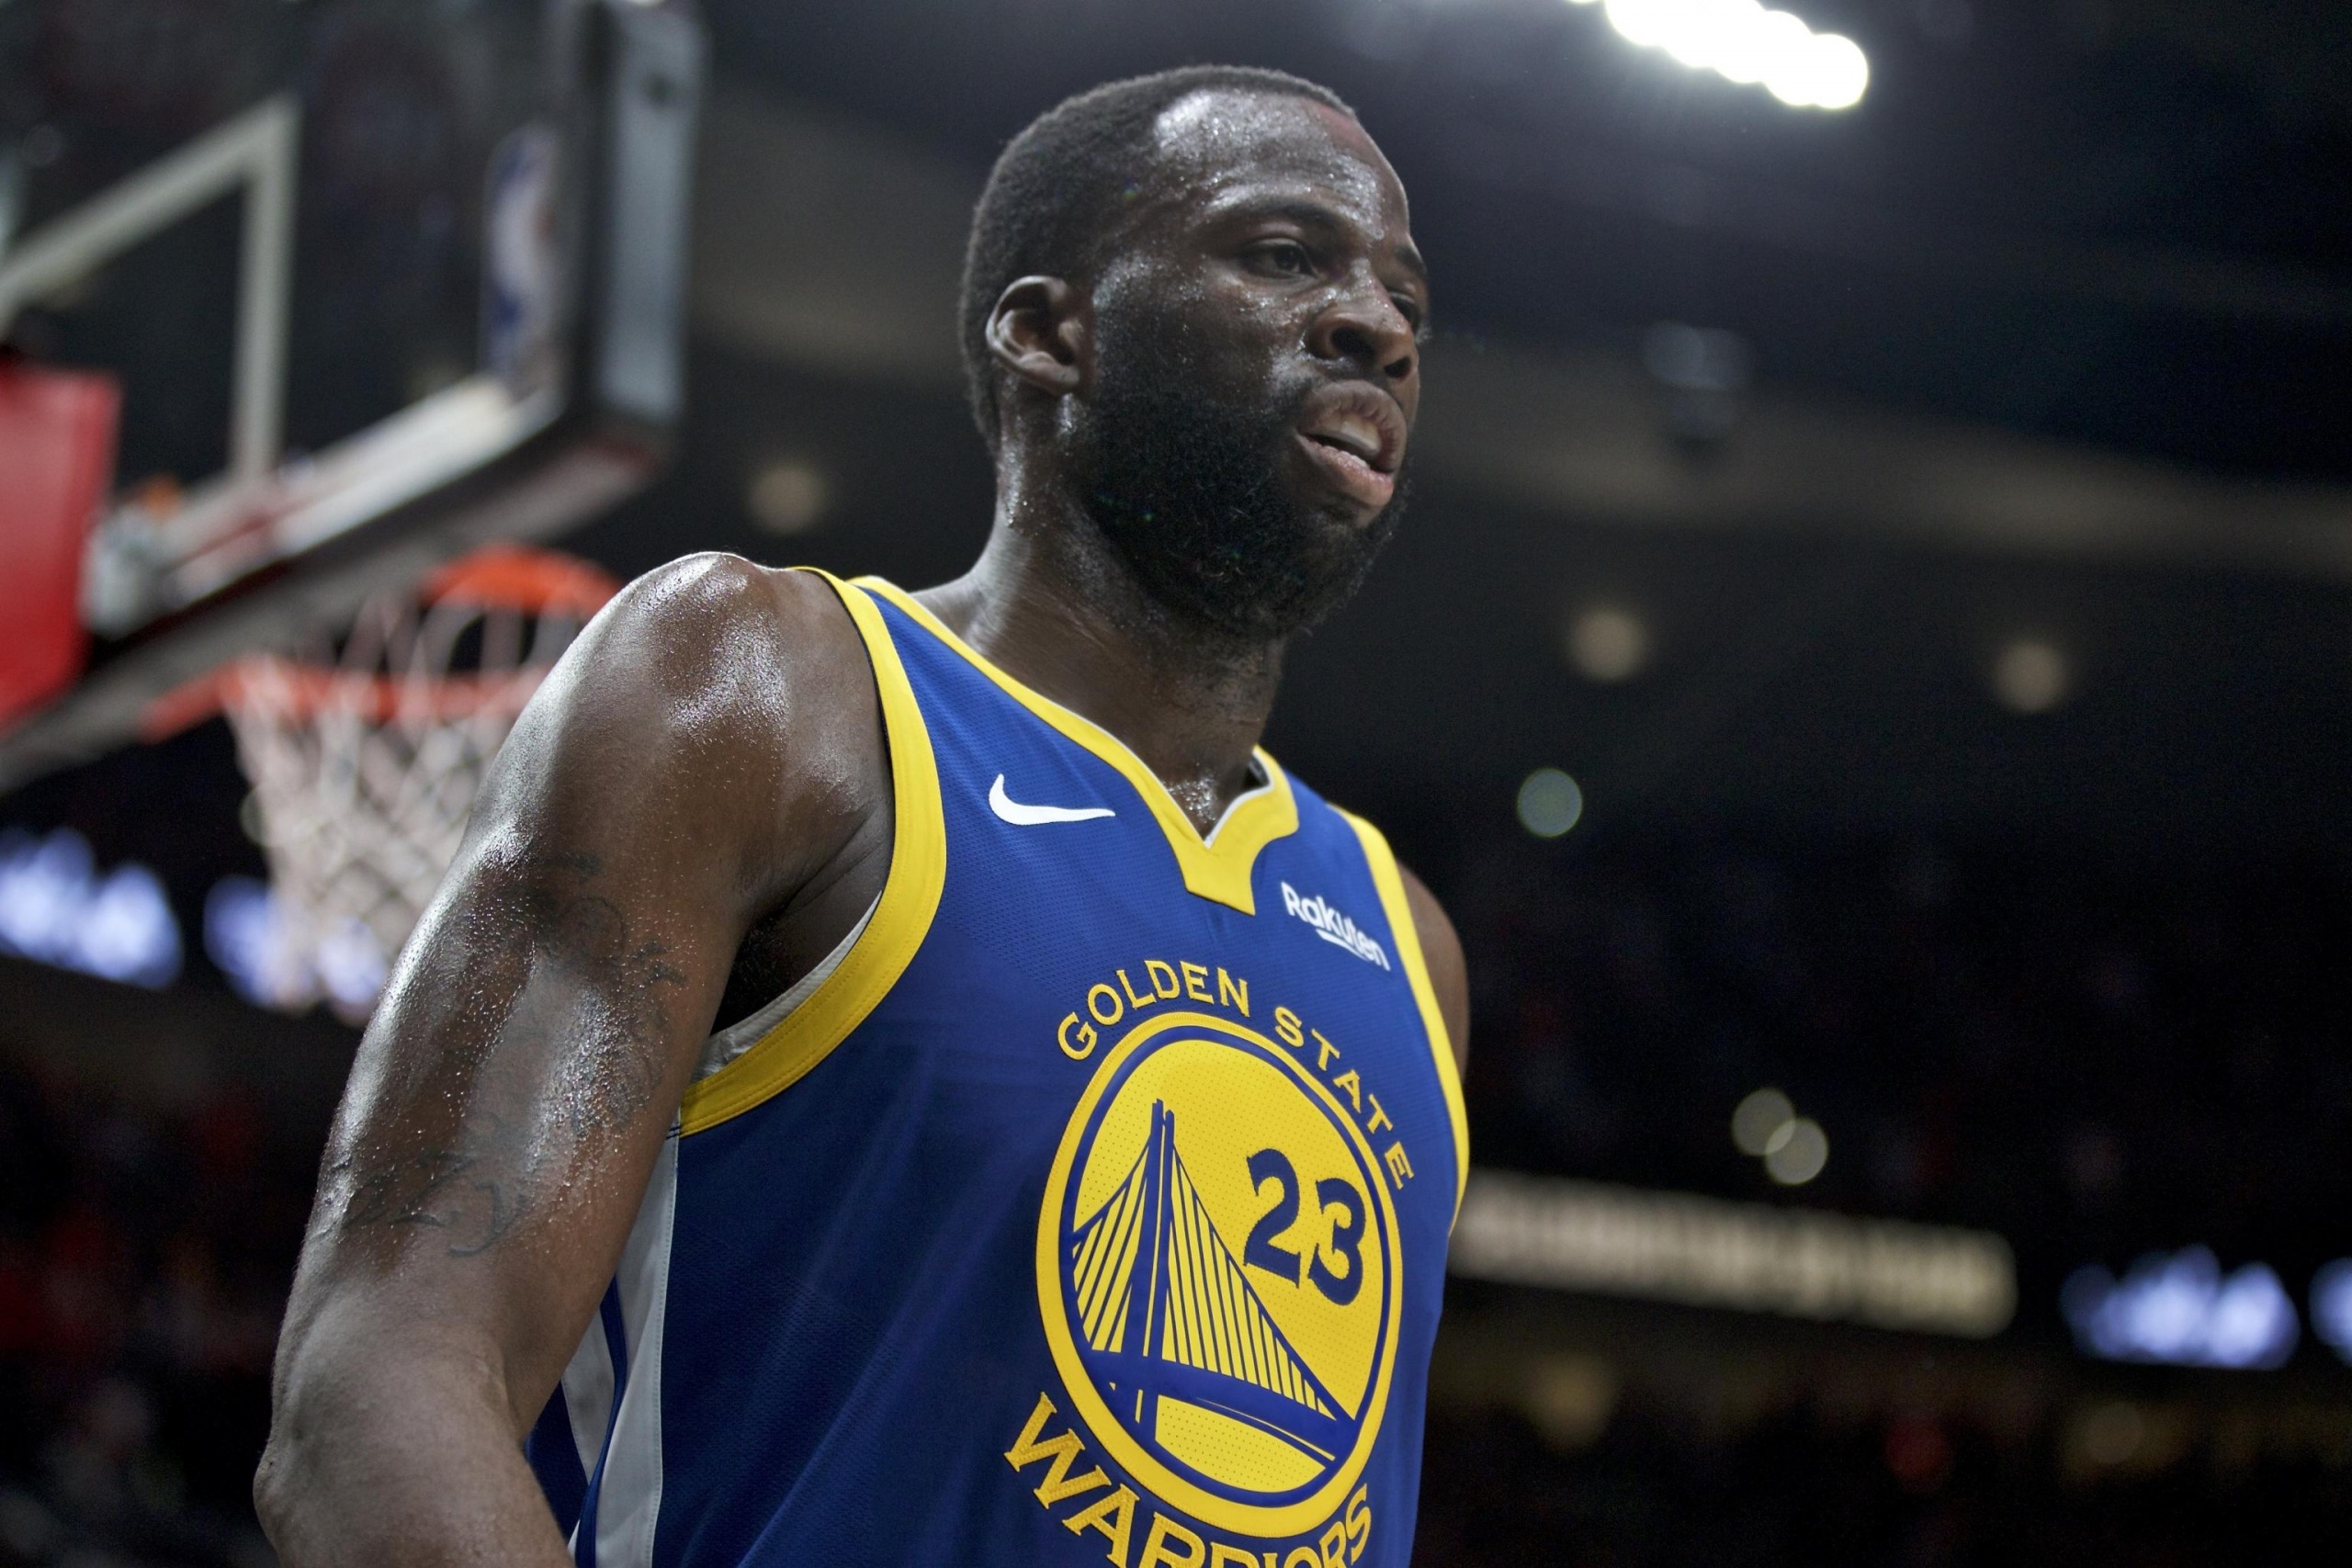 Draymond Green makes his point, convincingly